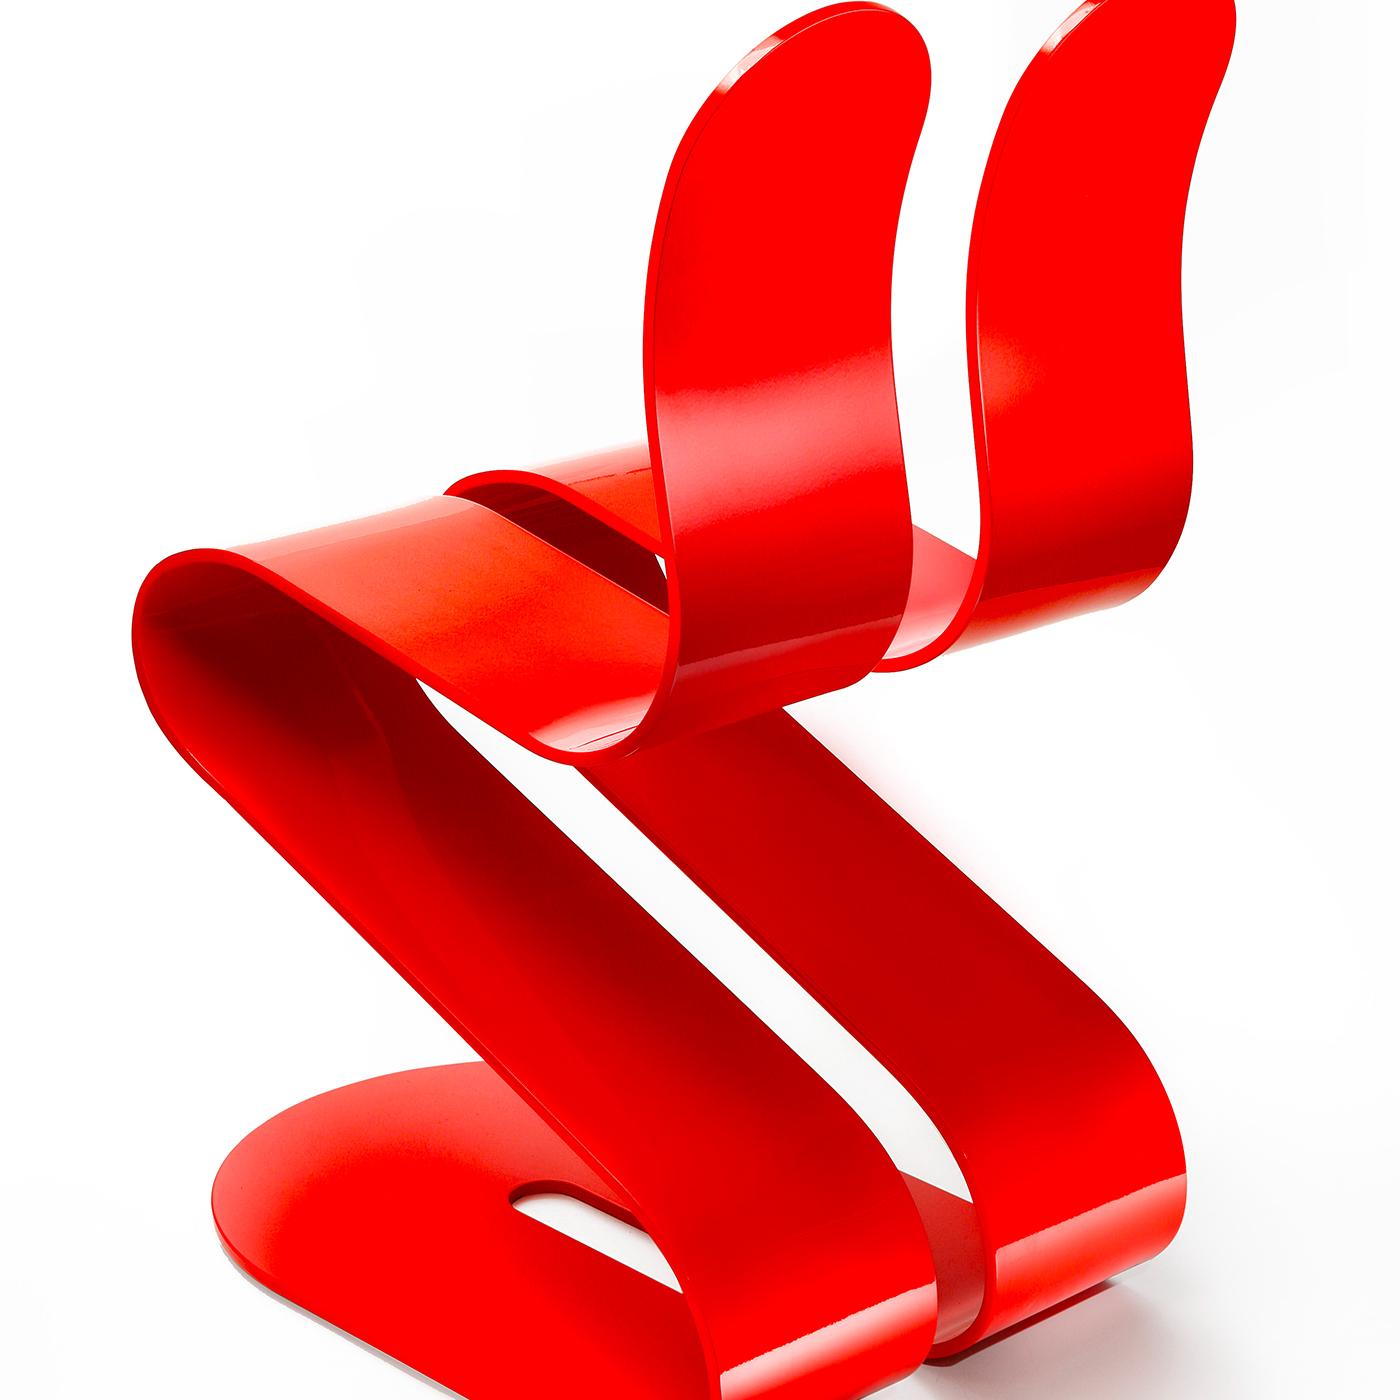 The simple and ergonomic silhouette of this red-lacquered chair is designed to provide ultimate support and exceptional comfort in a stylish and aesthetically harmonious piece. Designed by biomechanical engineer Michael d'Amato, this chair is